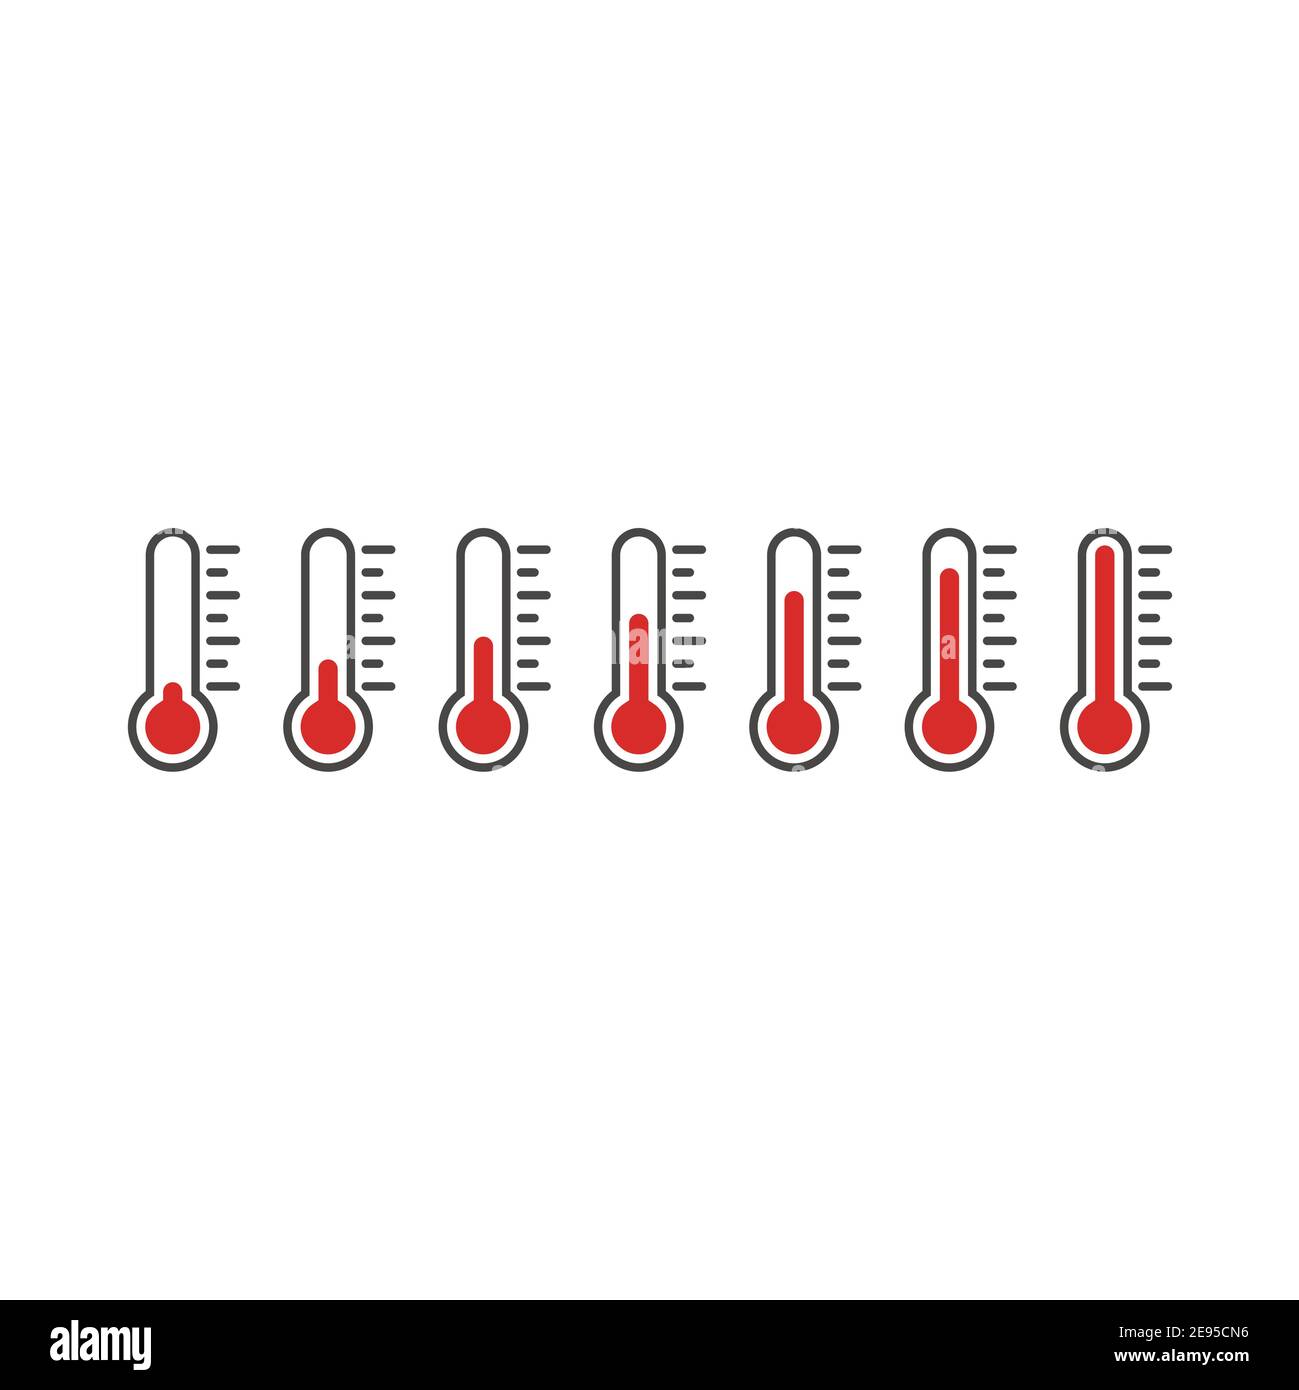 https://c8.alamy.com/comp/2E95CN6/thermometer-with-scale-and-degrees-icon-black-and-red-vector-symbol-2E95CN6.jpg